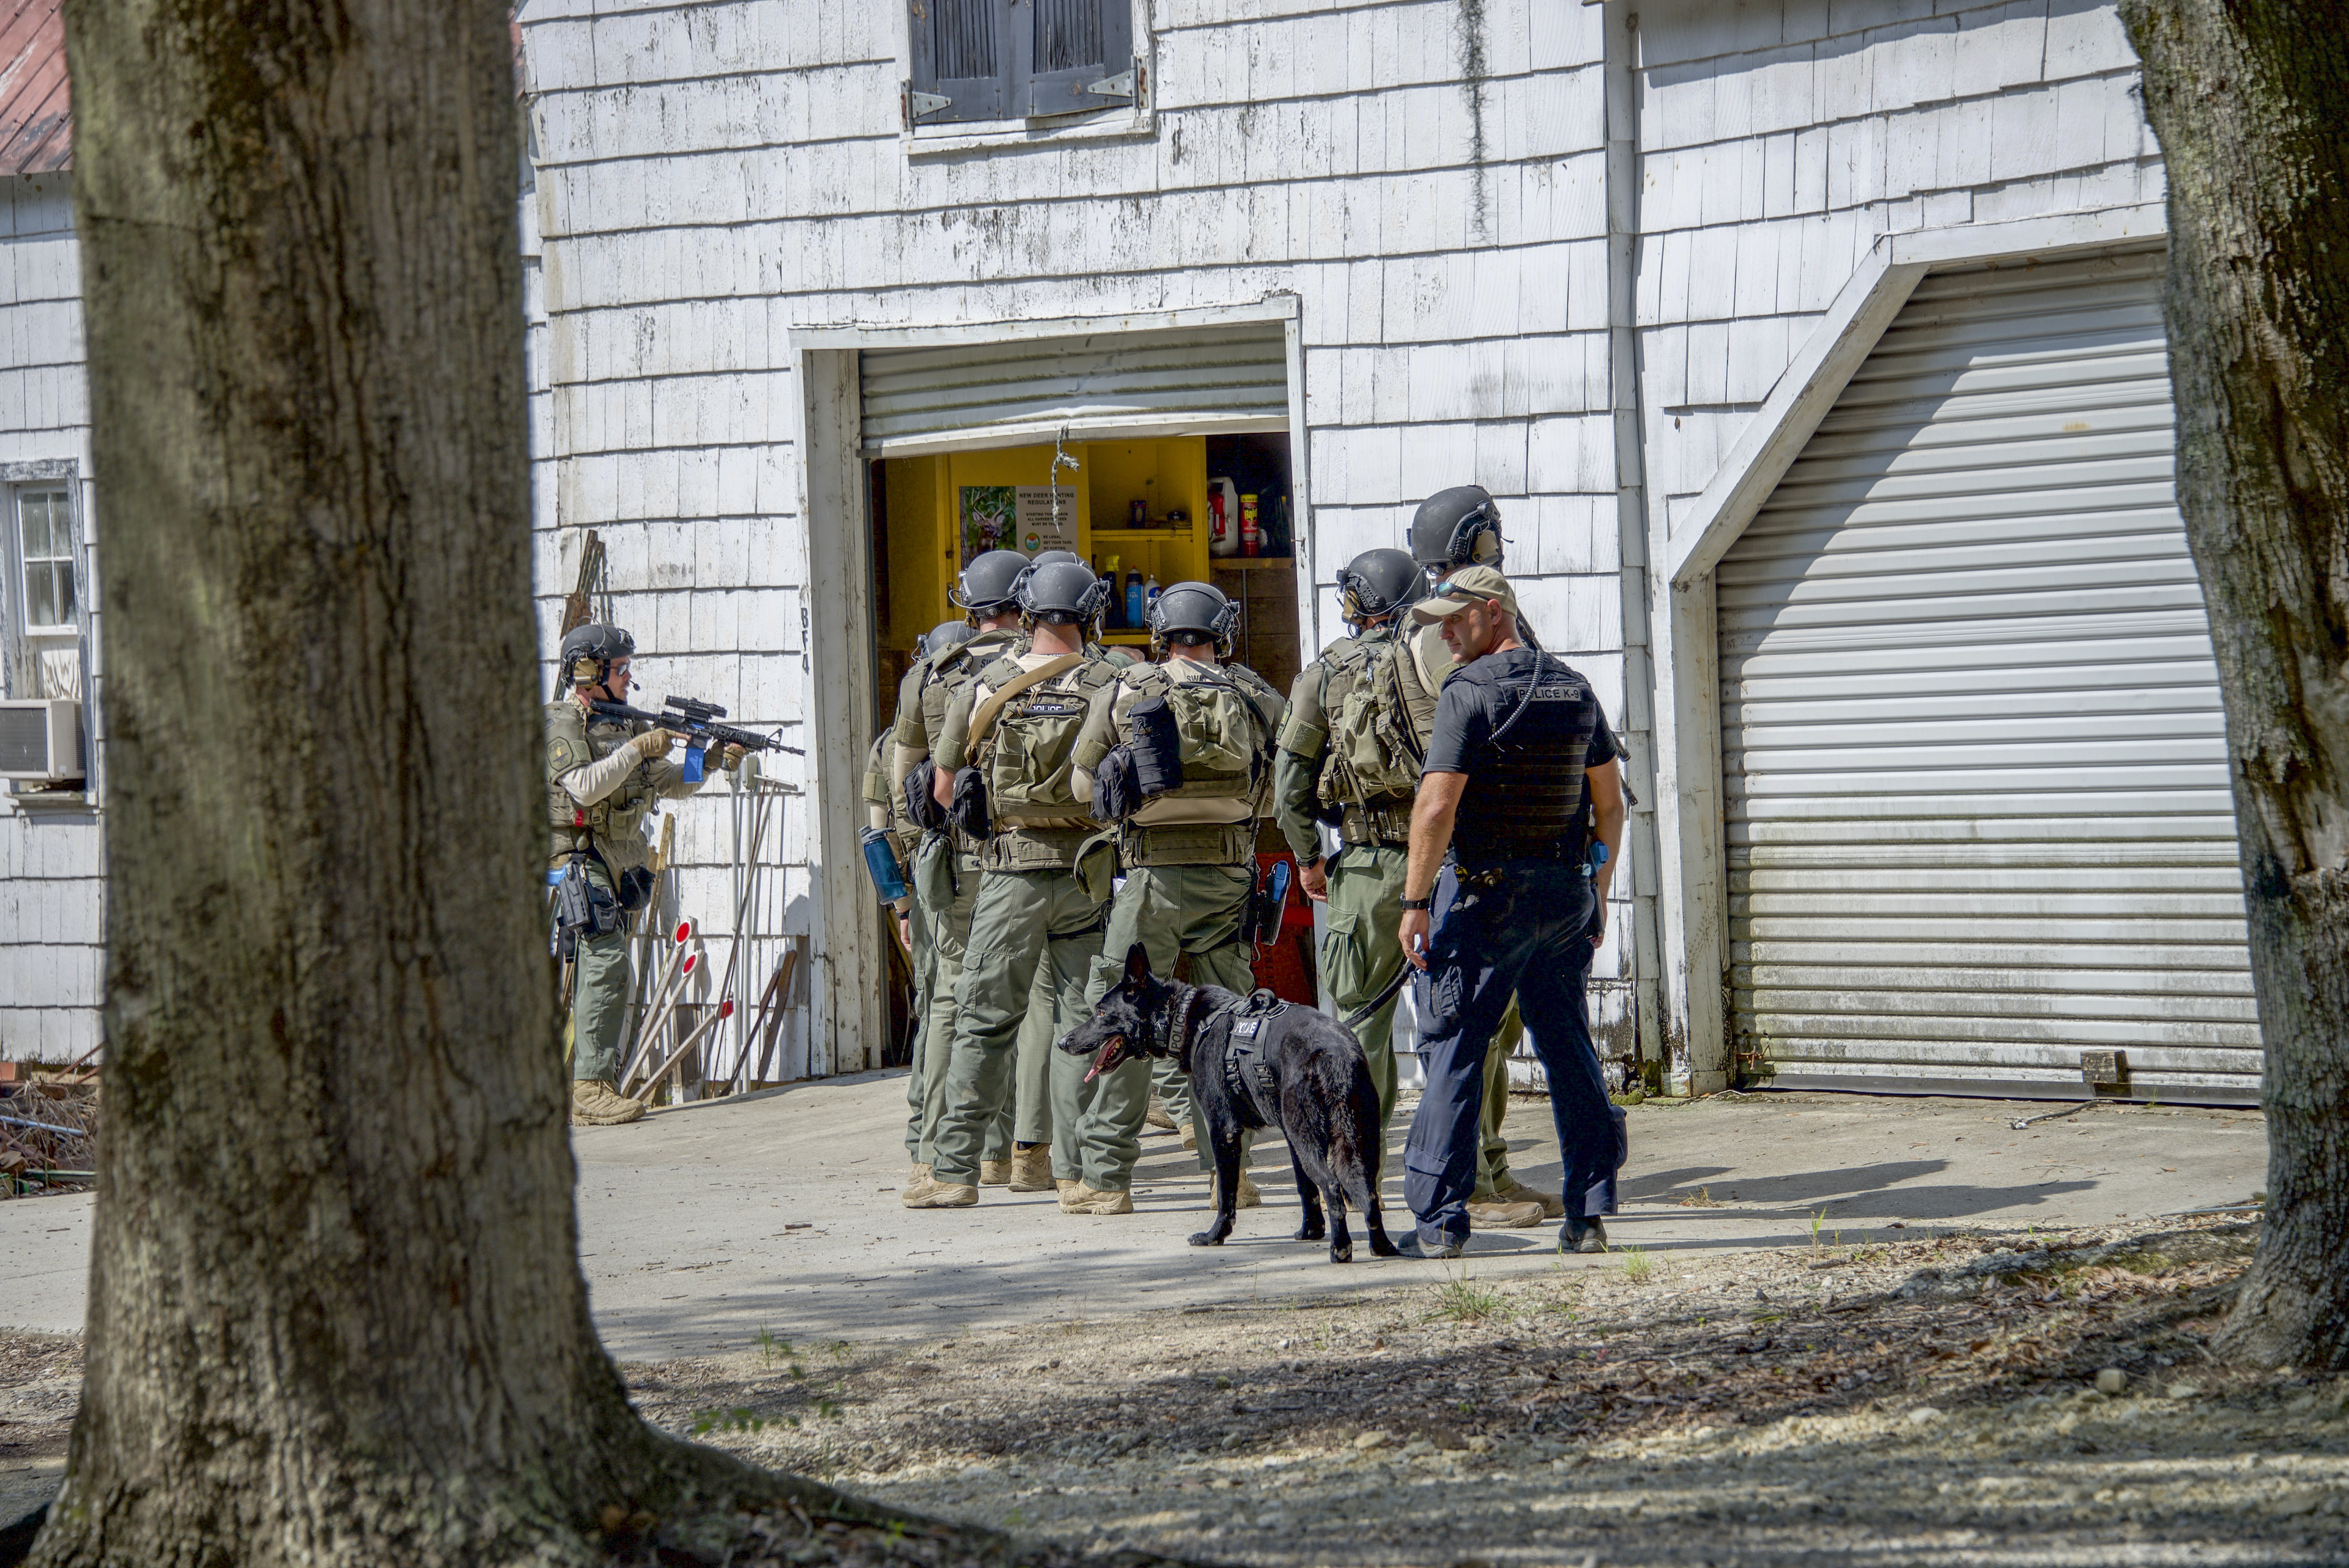 Charleston Police SWAT team members with a police dog enter a barn during a Hostage Rescue Team (HRT) training exercise held August 5-7, 2019, in Charleston, South Carolina.